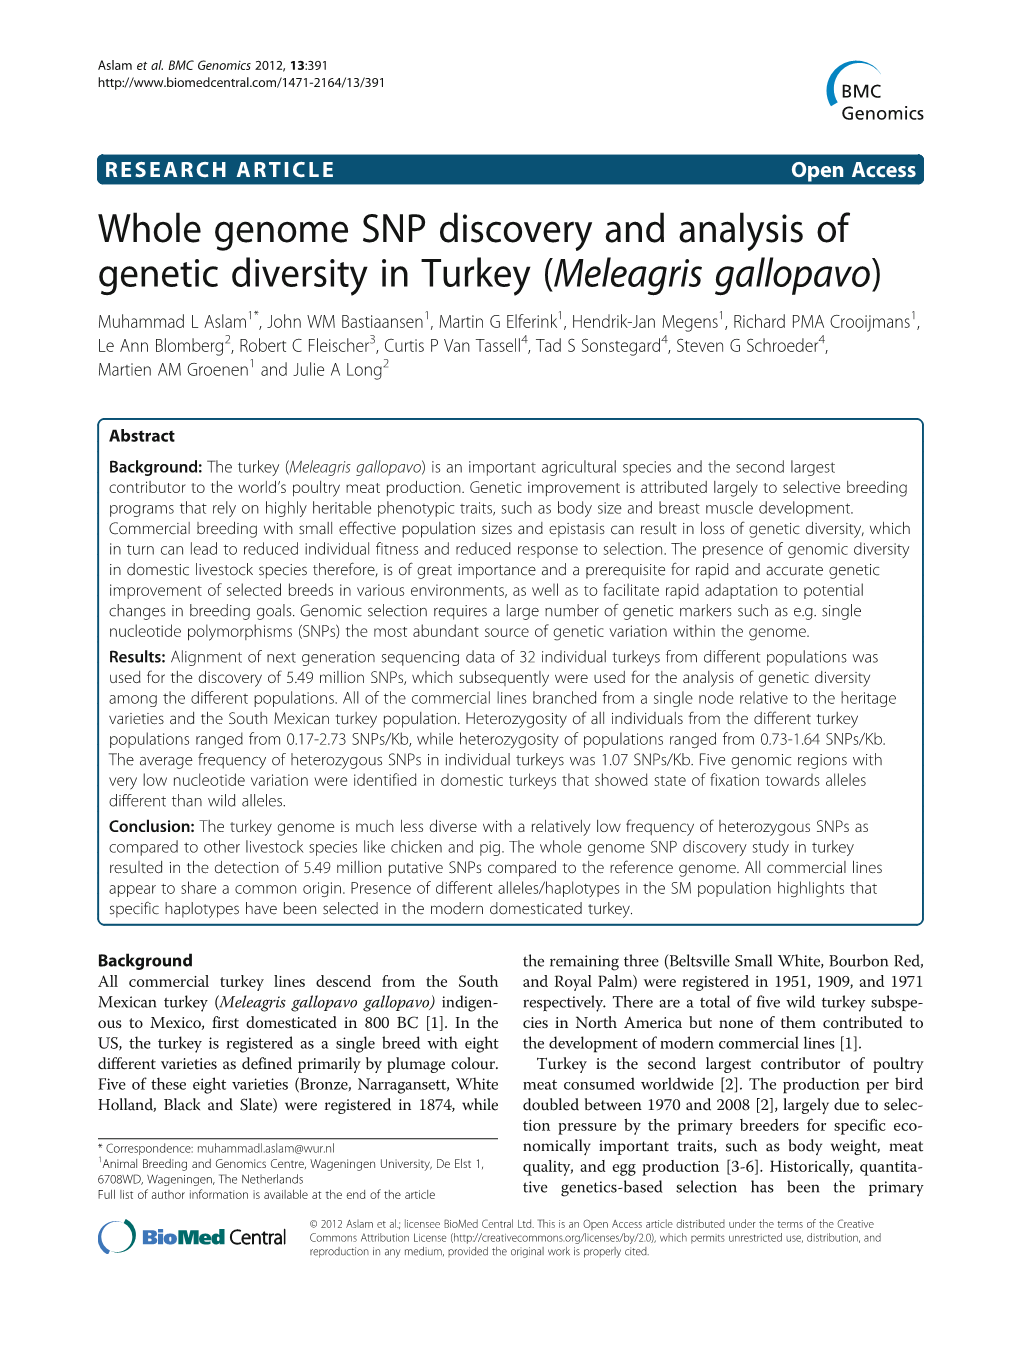 Whole Genome SNP Discovery and Analysis of Genetic Diversity in Turkey (Meleagris Gallopavo)